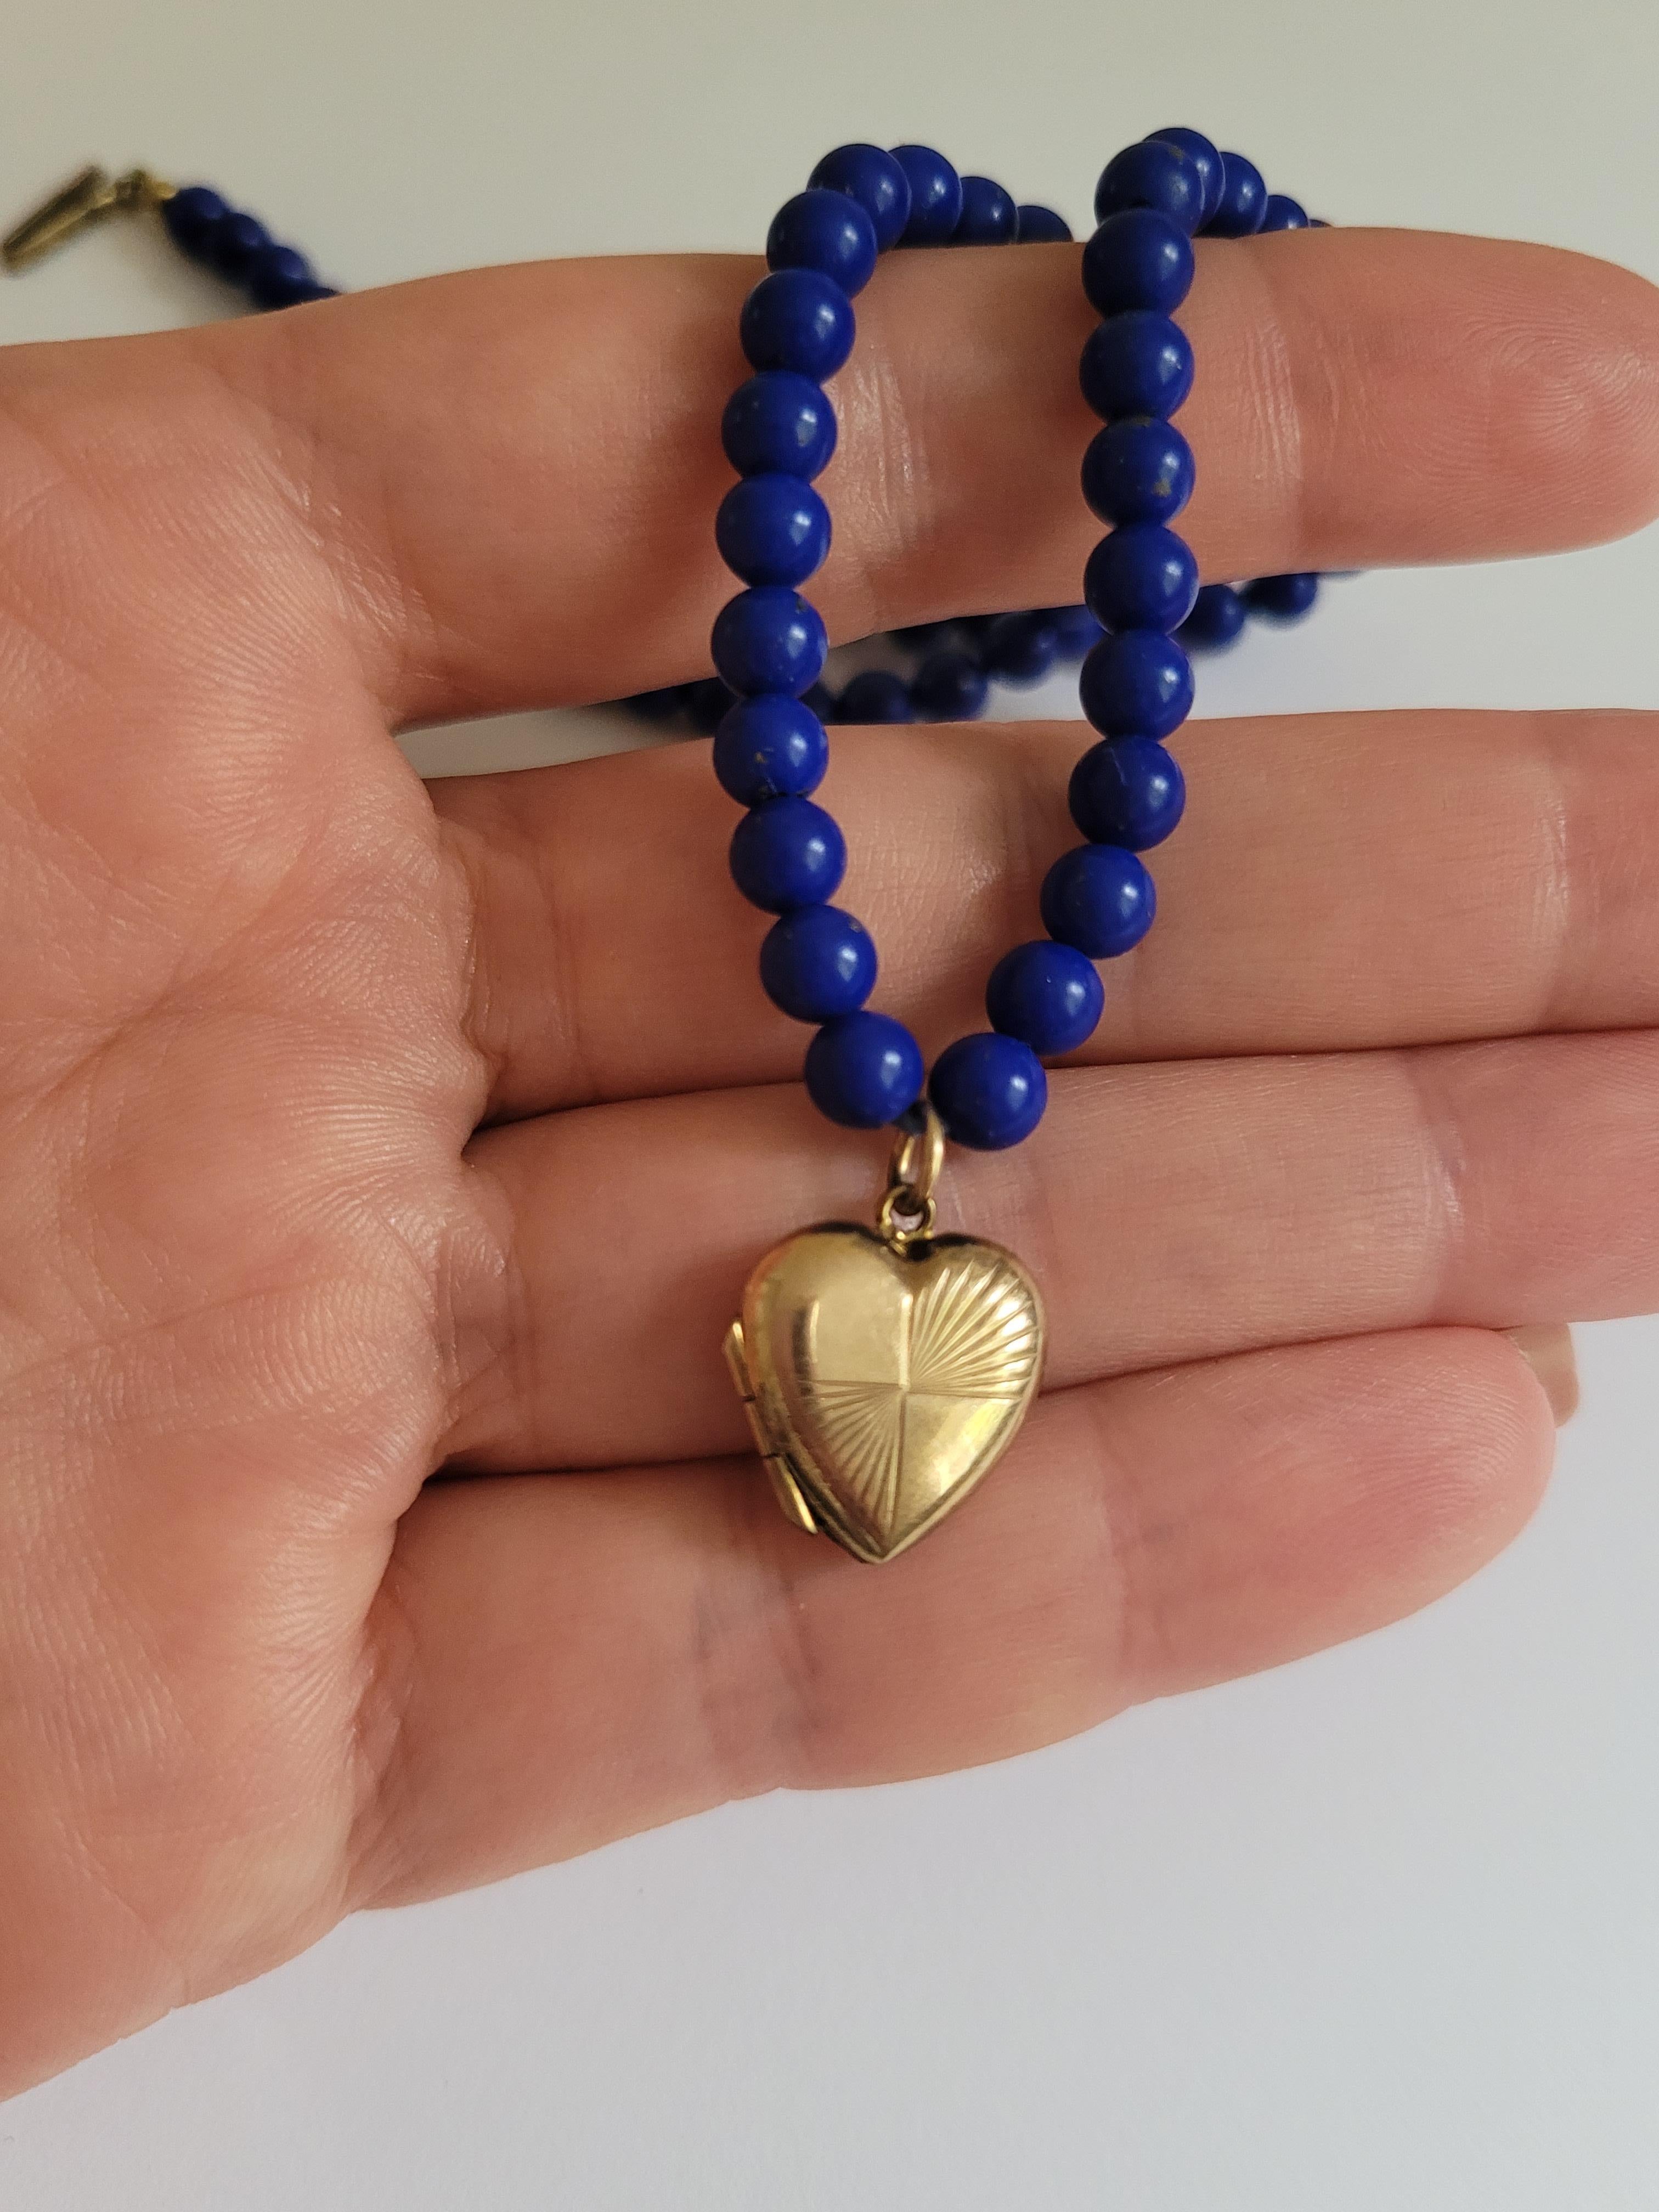 Vintage Heart Locket and Lapis Lazuli Beads necklace In Good Condition For Sale In Boston, Lincolnshire